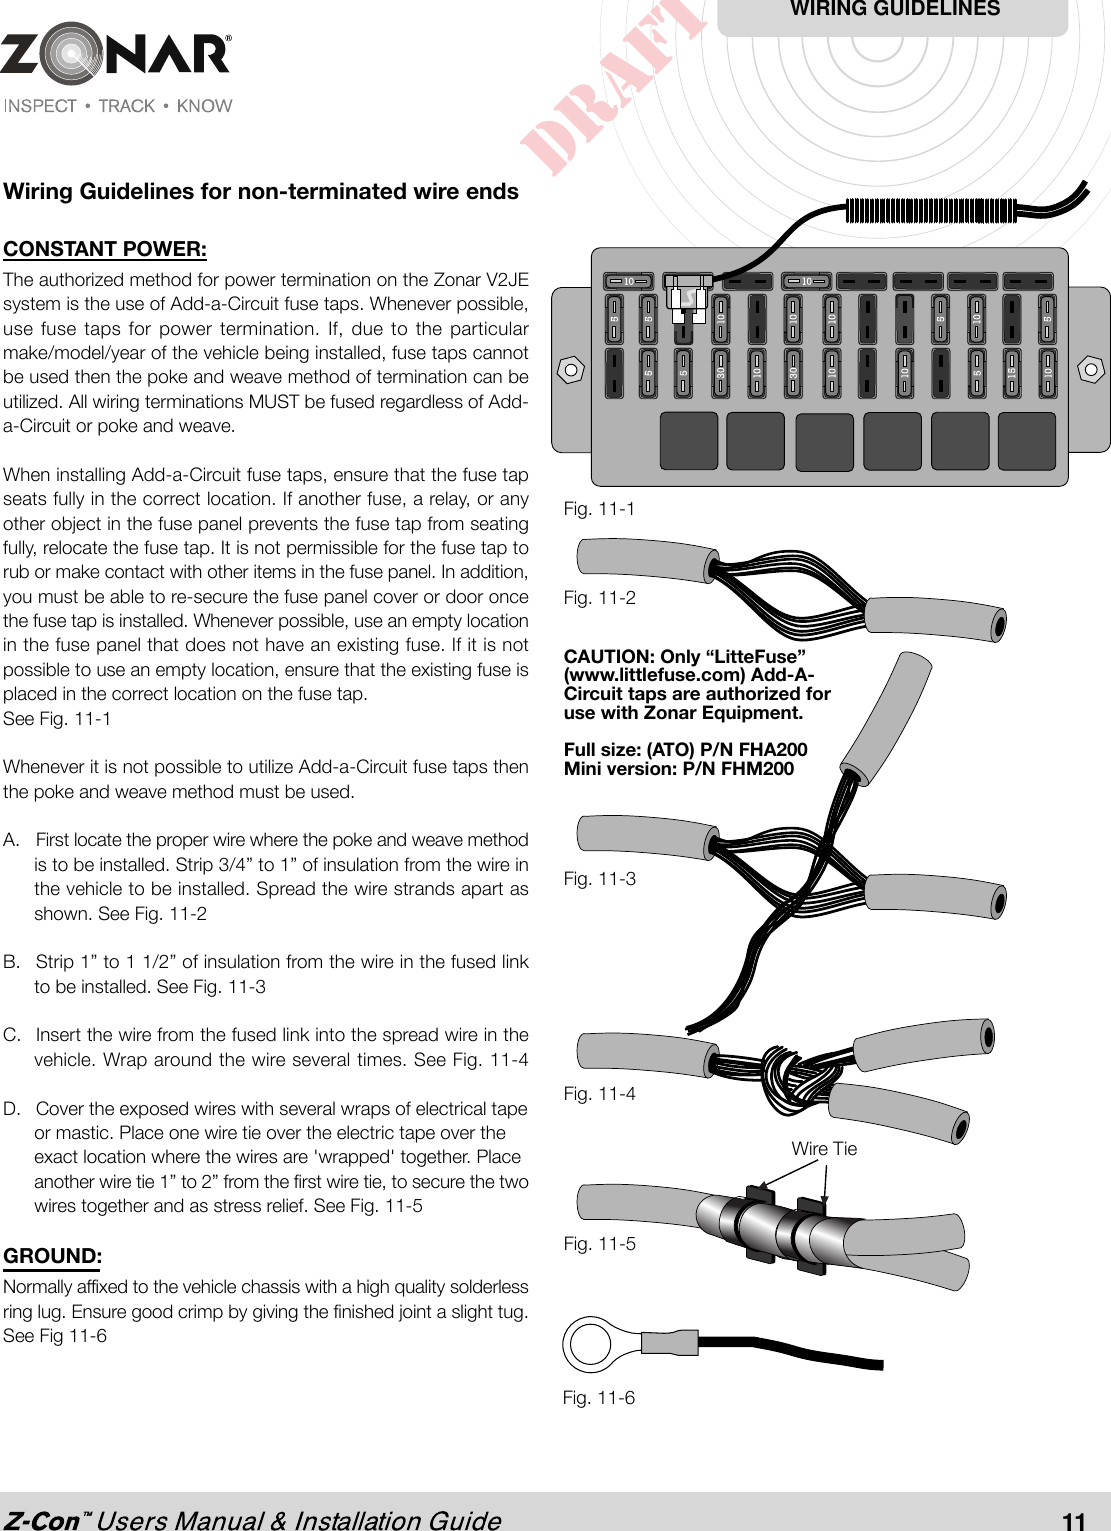 Wiring Guidelines for non-terminated wire endsCONSTANT POWER:The authorized method for power termination on the Zonar V2JEsystem is the use of Add-a-Circuit fuse taps. Whenever possible,use fuse taps for power termination. If, due to the particularmake/model/year of the vehicle being installed, fuse taps cannotbe used then the poke and weave method of termination can beutilized. All wiring terminations MUST be fused regardless of Add-a-Circuit or poke and weave.When installing Add-a-Circuit fuse taps, ensure that the fuse tapseats fully in the correct location. If another fuse, a relay, or anyother object in the fuse panel prevents the fuse tap from seatingfully, relocate the fuse tap. It is not permissible for the fuse tap torub or make contact with other items in the fuse panel. In addition,you must be able to re-secure the fuse panel cover or door oncethe fuse tap is installed. Whenever possible, use an empty locationin the fuse panel that does not have an existing fuse. If it is notpossible to use an empty location, ensure that the existing fuse isplaced in the correct location on the fuse tap.See Fig. 11-1Whenever it is not possible to utilize Add-a-Circuit fuse taps thenthe poke and weave method must be used.A. First locate the proper wire where the poke and weave methodis to be installed. Strip 3/4” to 1” of insulation from the wire inthe vehicle to be installed. Spread the wire strands apart asshown. See Fig. 11-2B. Strip 1” to 1 1/2” of insulation from the wire in the fused linkto be installed. See Fig. 11-3C. Insert the wire from the fused link into the spread wire in thevehicle. Wrap around the wire several times. See Fig. 11-4D. Cover the exposed wires with several wraps of electrical tapeor mastic. Place one wire tie over the electric tape over theexact location where the wires are &apos;wrapped&apos; together. Placeanother wire tie 1” to 2” from the first wire tie, to secure the twowires together and as stress relief. See Fig. 11-5GROUND:Normally affixed to the vehicle chassis with a high quality solderlessring lug. Ensure good crimp by giving the finished joint a slight tug.See Fig 11-6Fig. 11-1Wire TieFig. 11-5Fig. 11-4Fig. 11-3Fig. 11-2WIRING GUIDELINESCAUTION: Only “LitteFuse”(www.littlefuse.com) Add-A-Circuit taps are authorized foruse with Zonar Equipment.Full size: (ATO) P/N FHA200Mini version: P/N FHM200Fig. 11-611